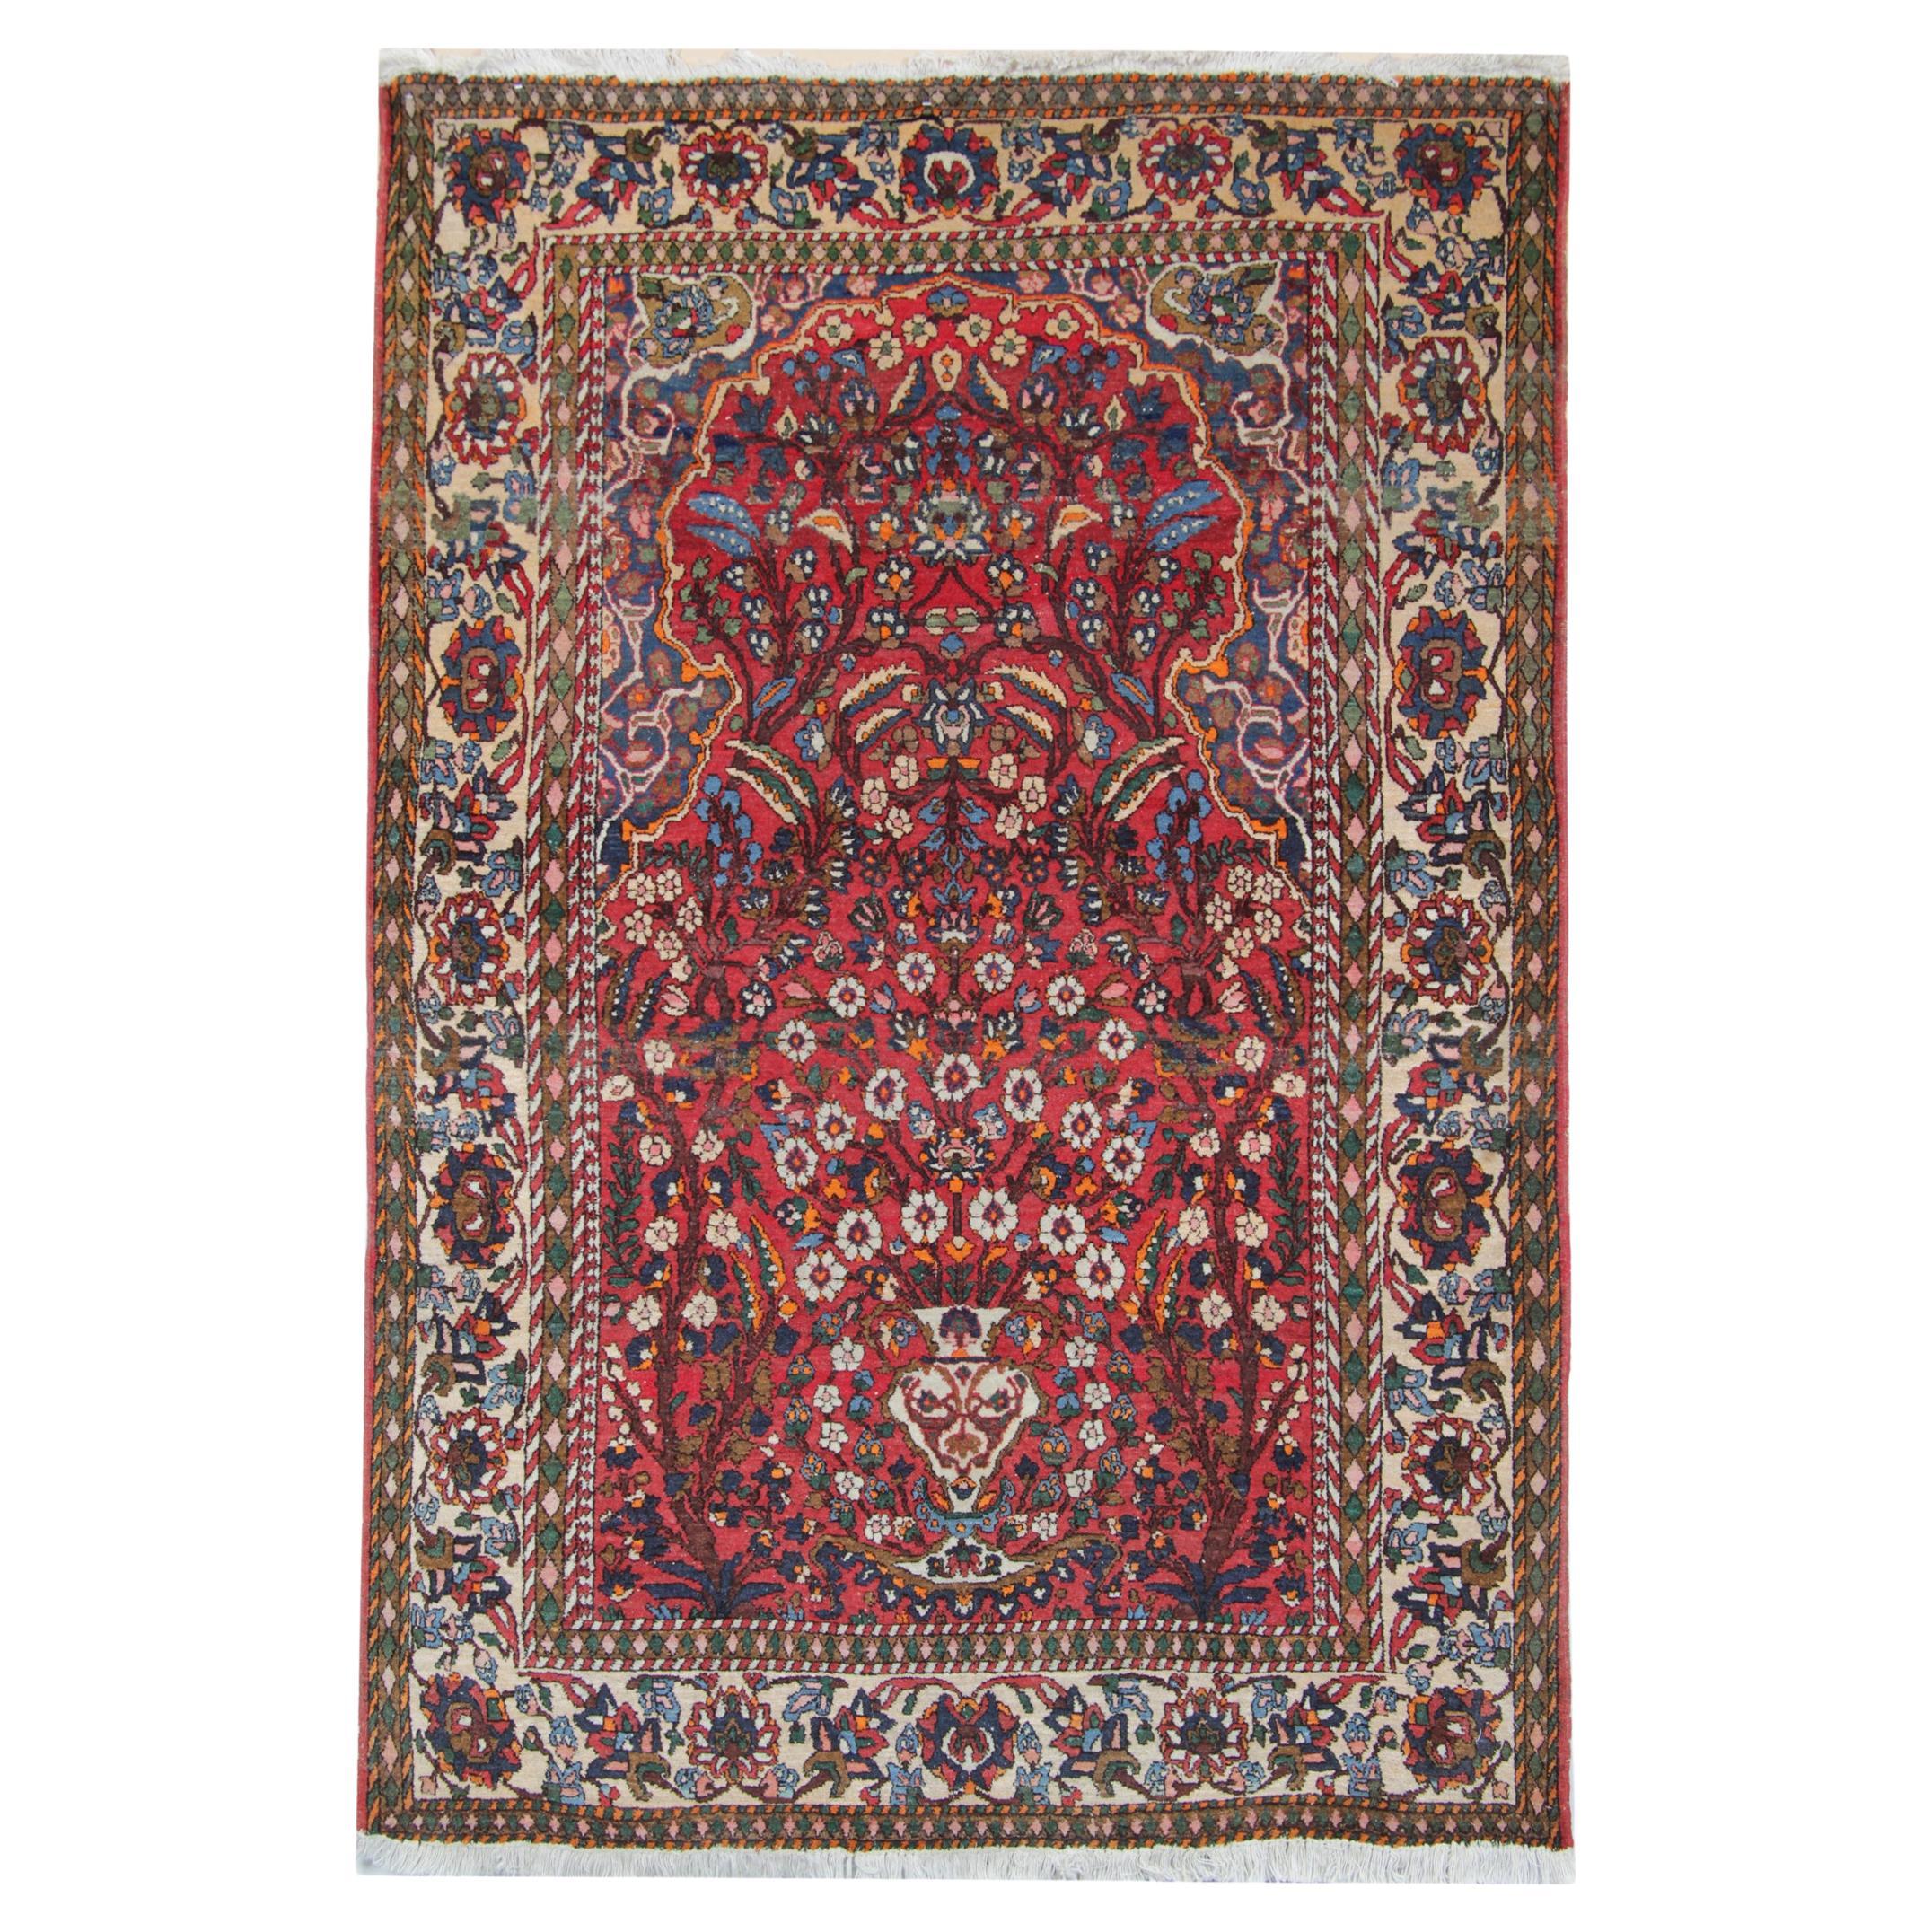 Traditional Red Wool Carpet Handknotted Orienal Antique Area Rug